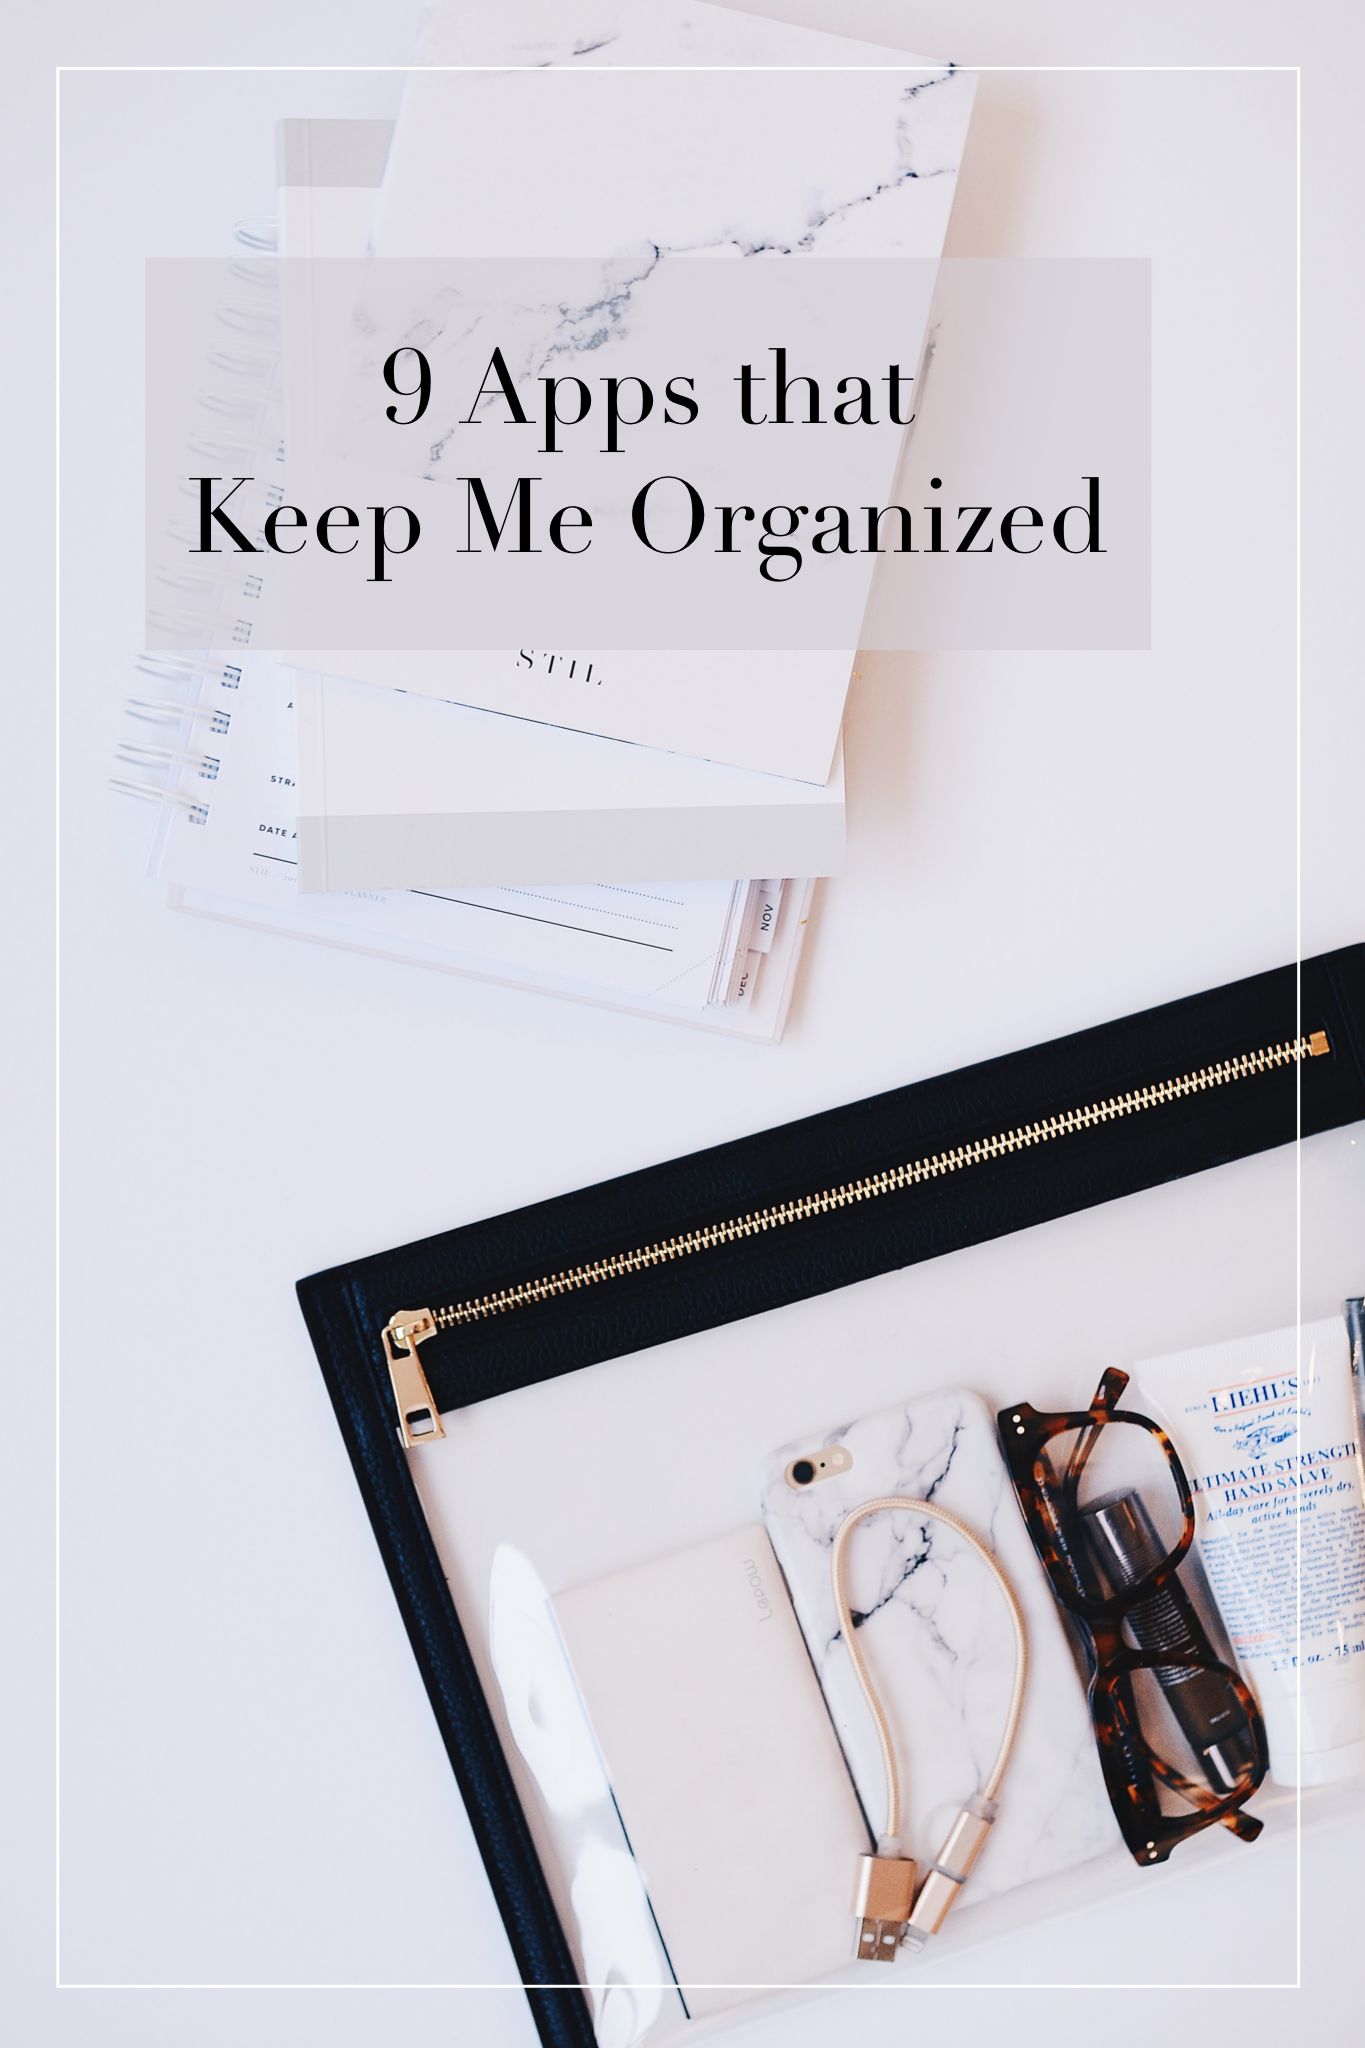 Ridgely Brode shares 9 apps that keep her organized and that she uses on a regular basis on her blog, Ridgely's Radar